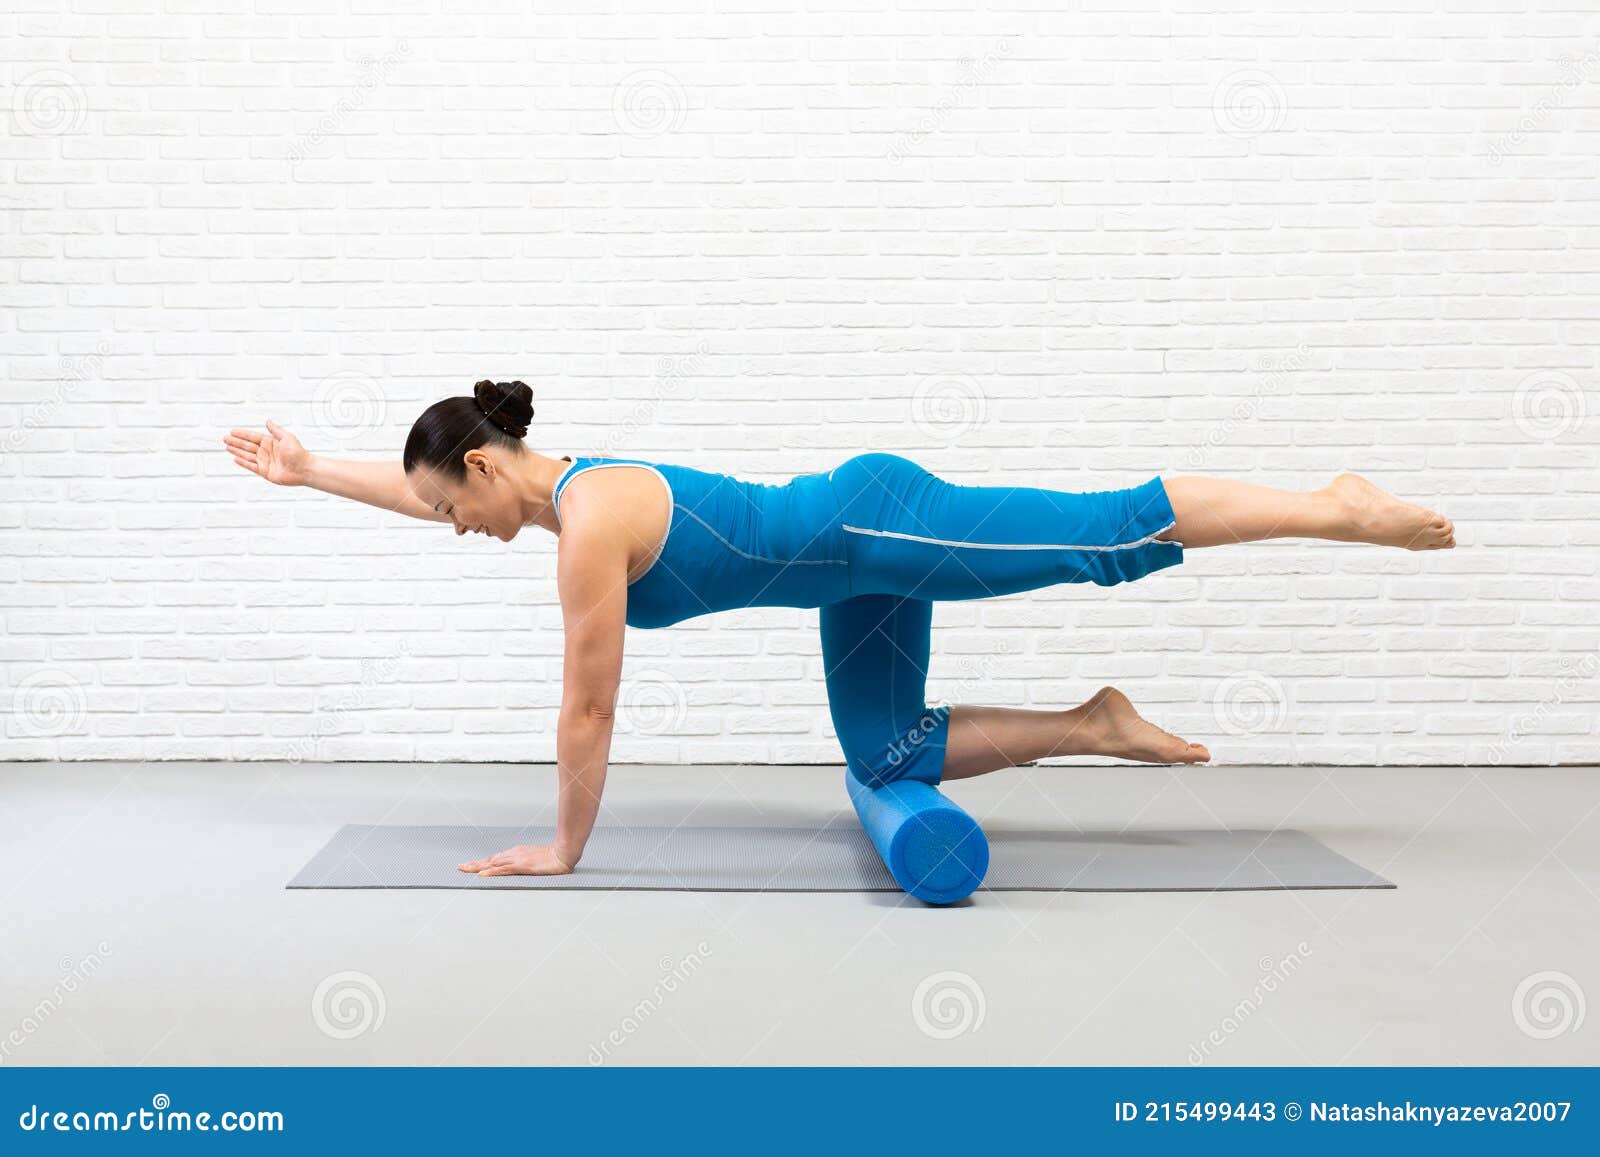 Adult Fit Woman Practice Pilates with Props in Fitness Studio Indoor, Bird  Dog Drill with One Leg Up and Foam Roller Stock Image - Image of activity,  caucasian: 215499443